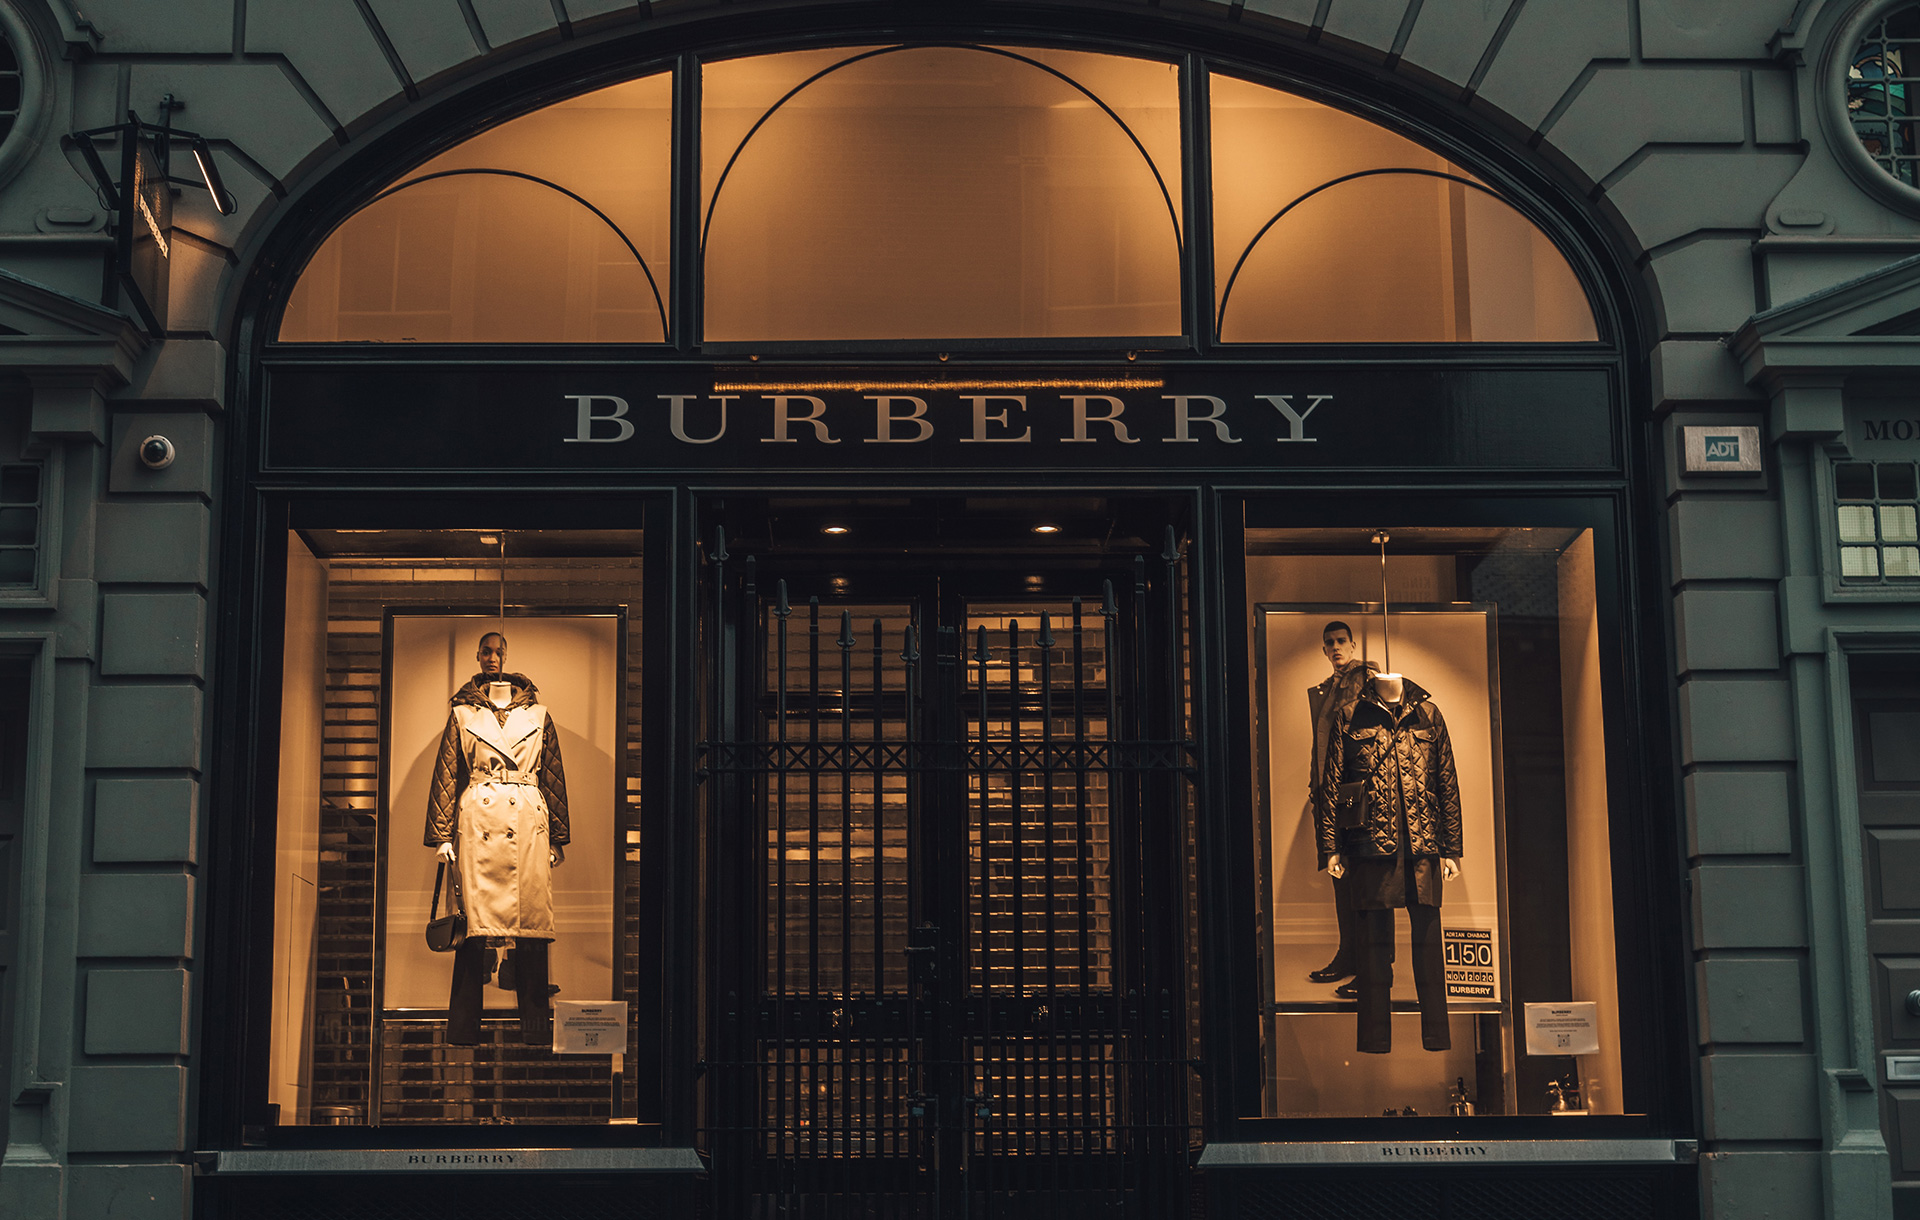 Burberry – from chavvy to tech-savvy